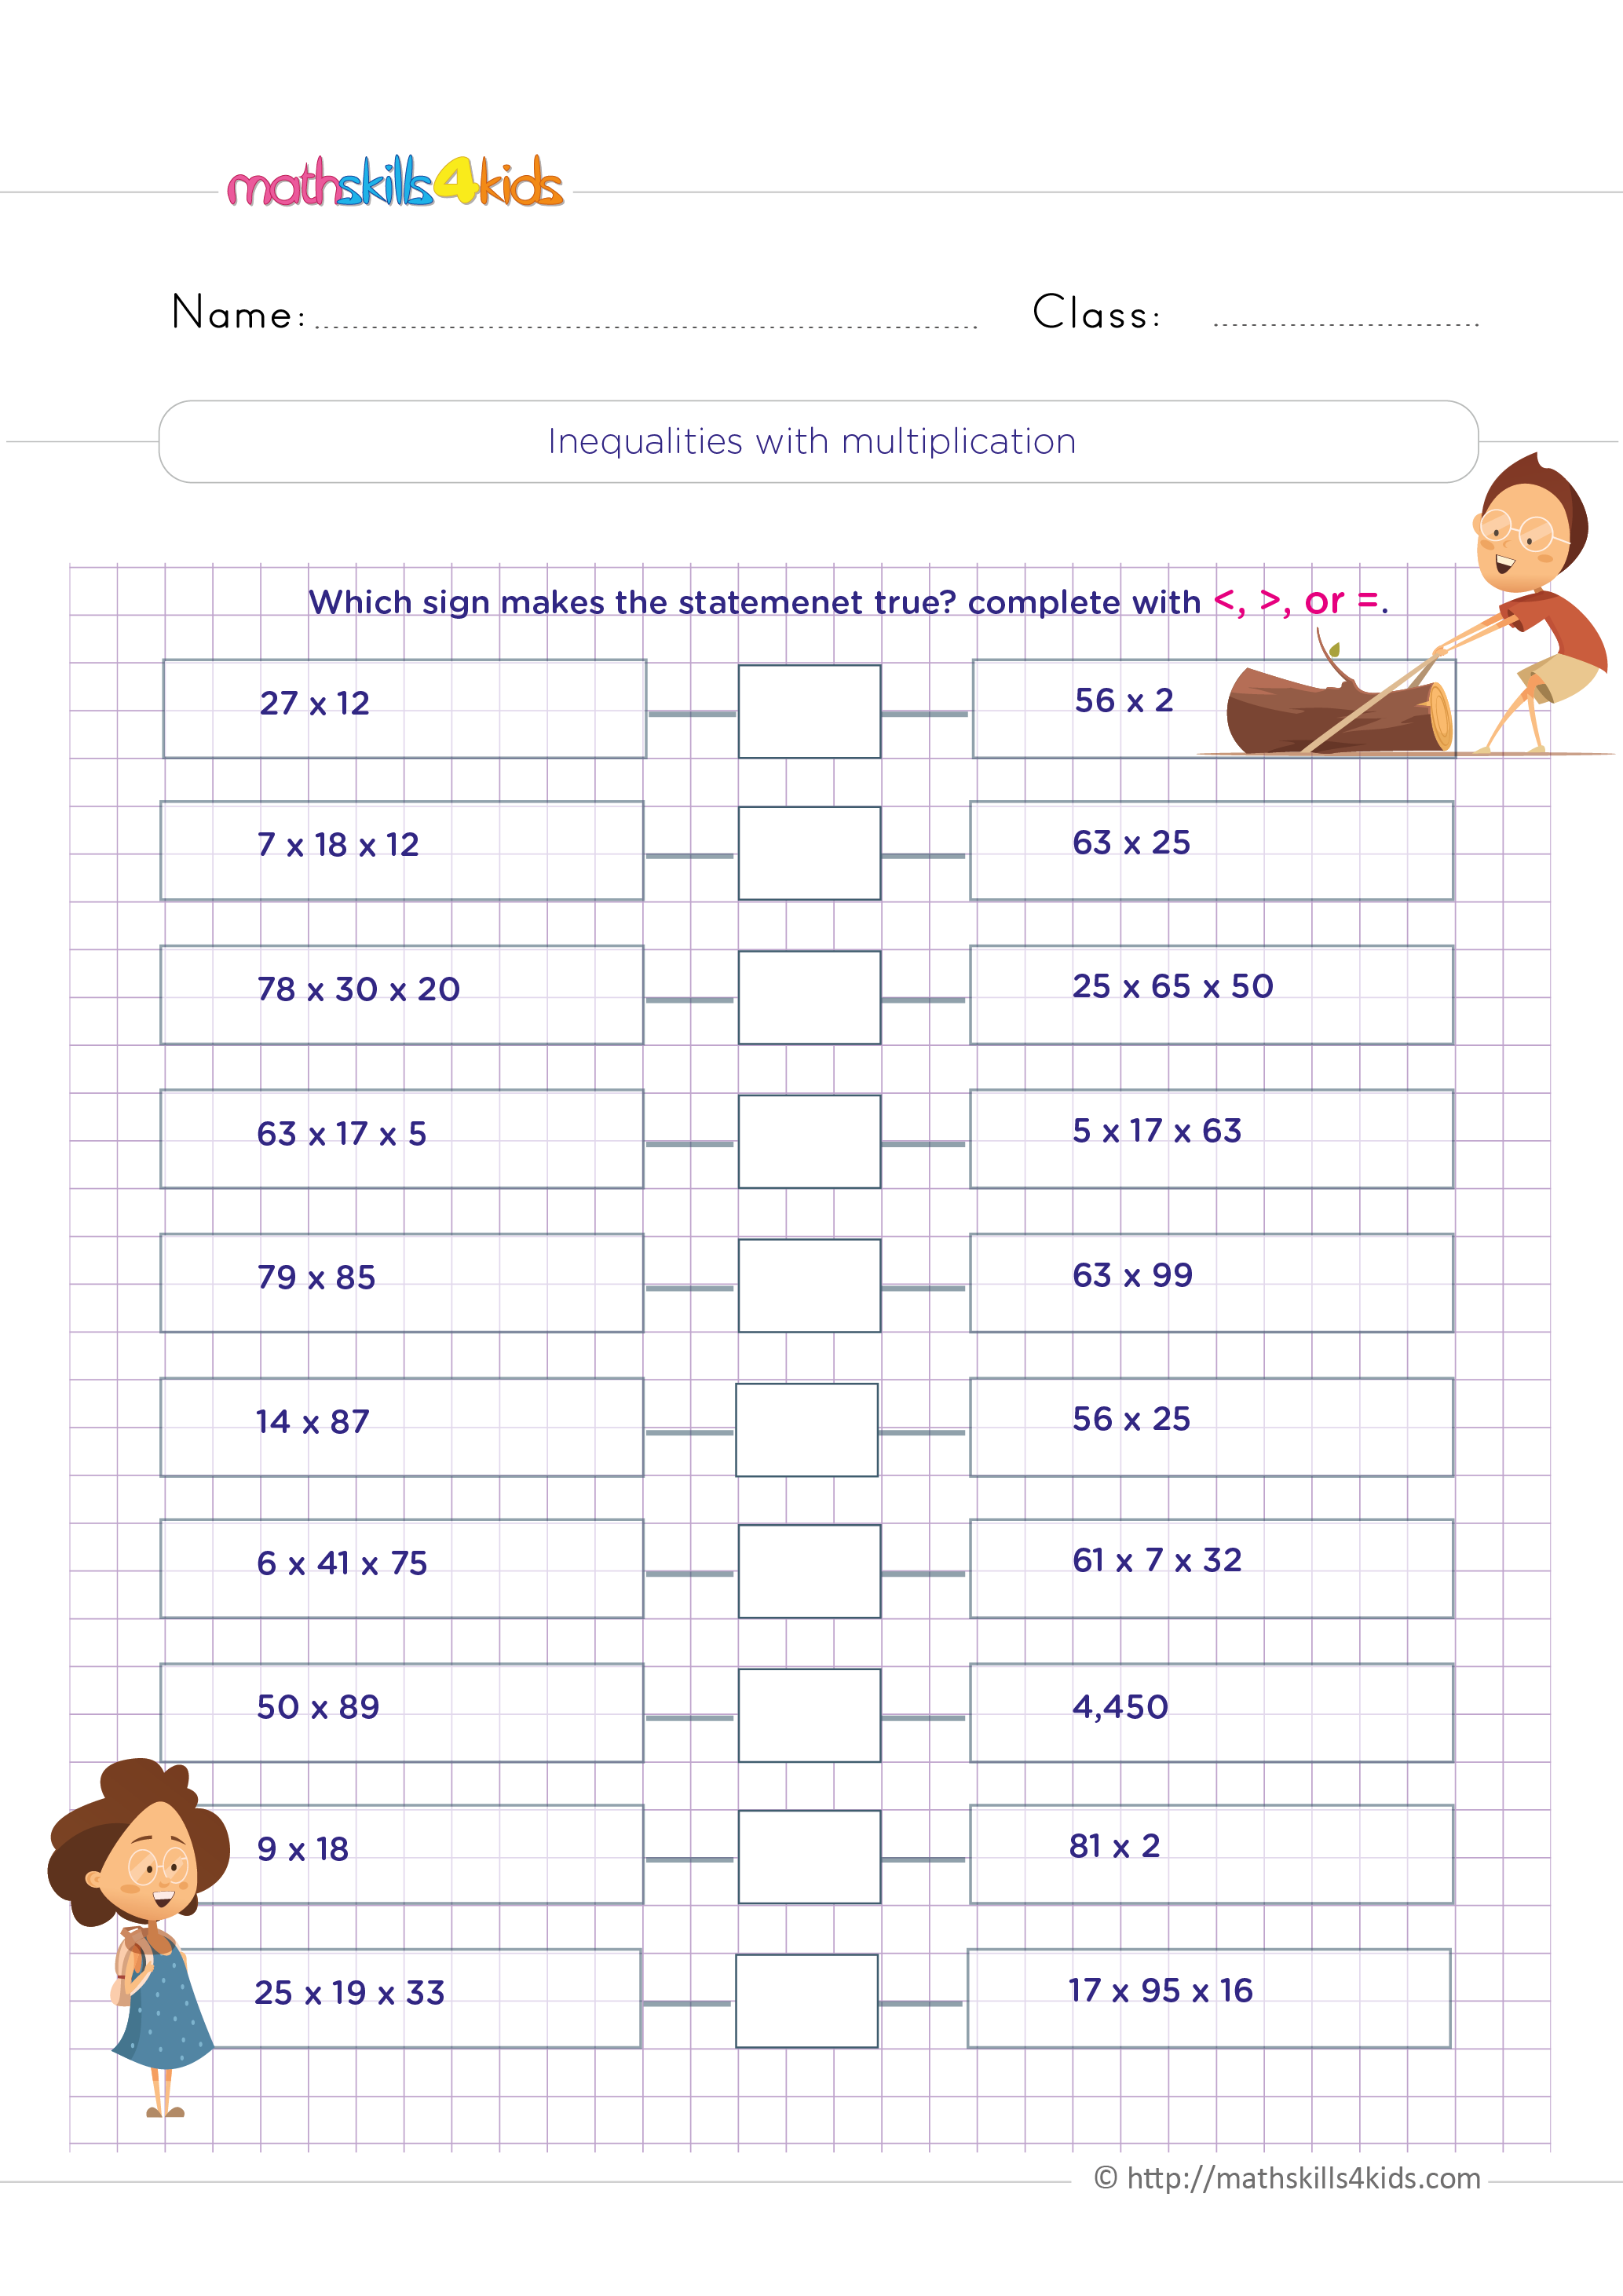 Free printable multiplication worksheets for 4th graders: Practice makes perfect - Practice solving inequalities with multiplication